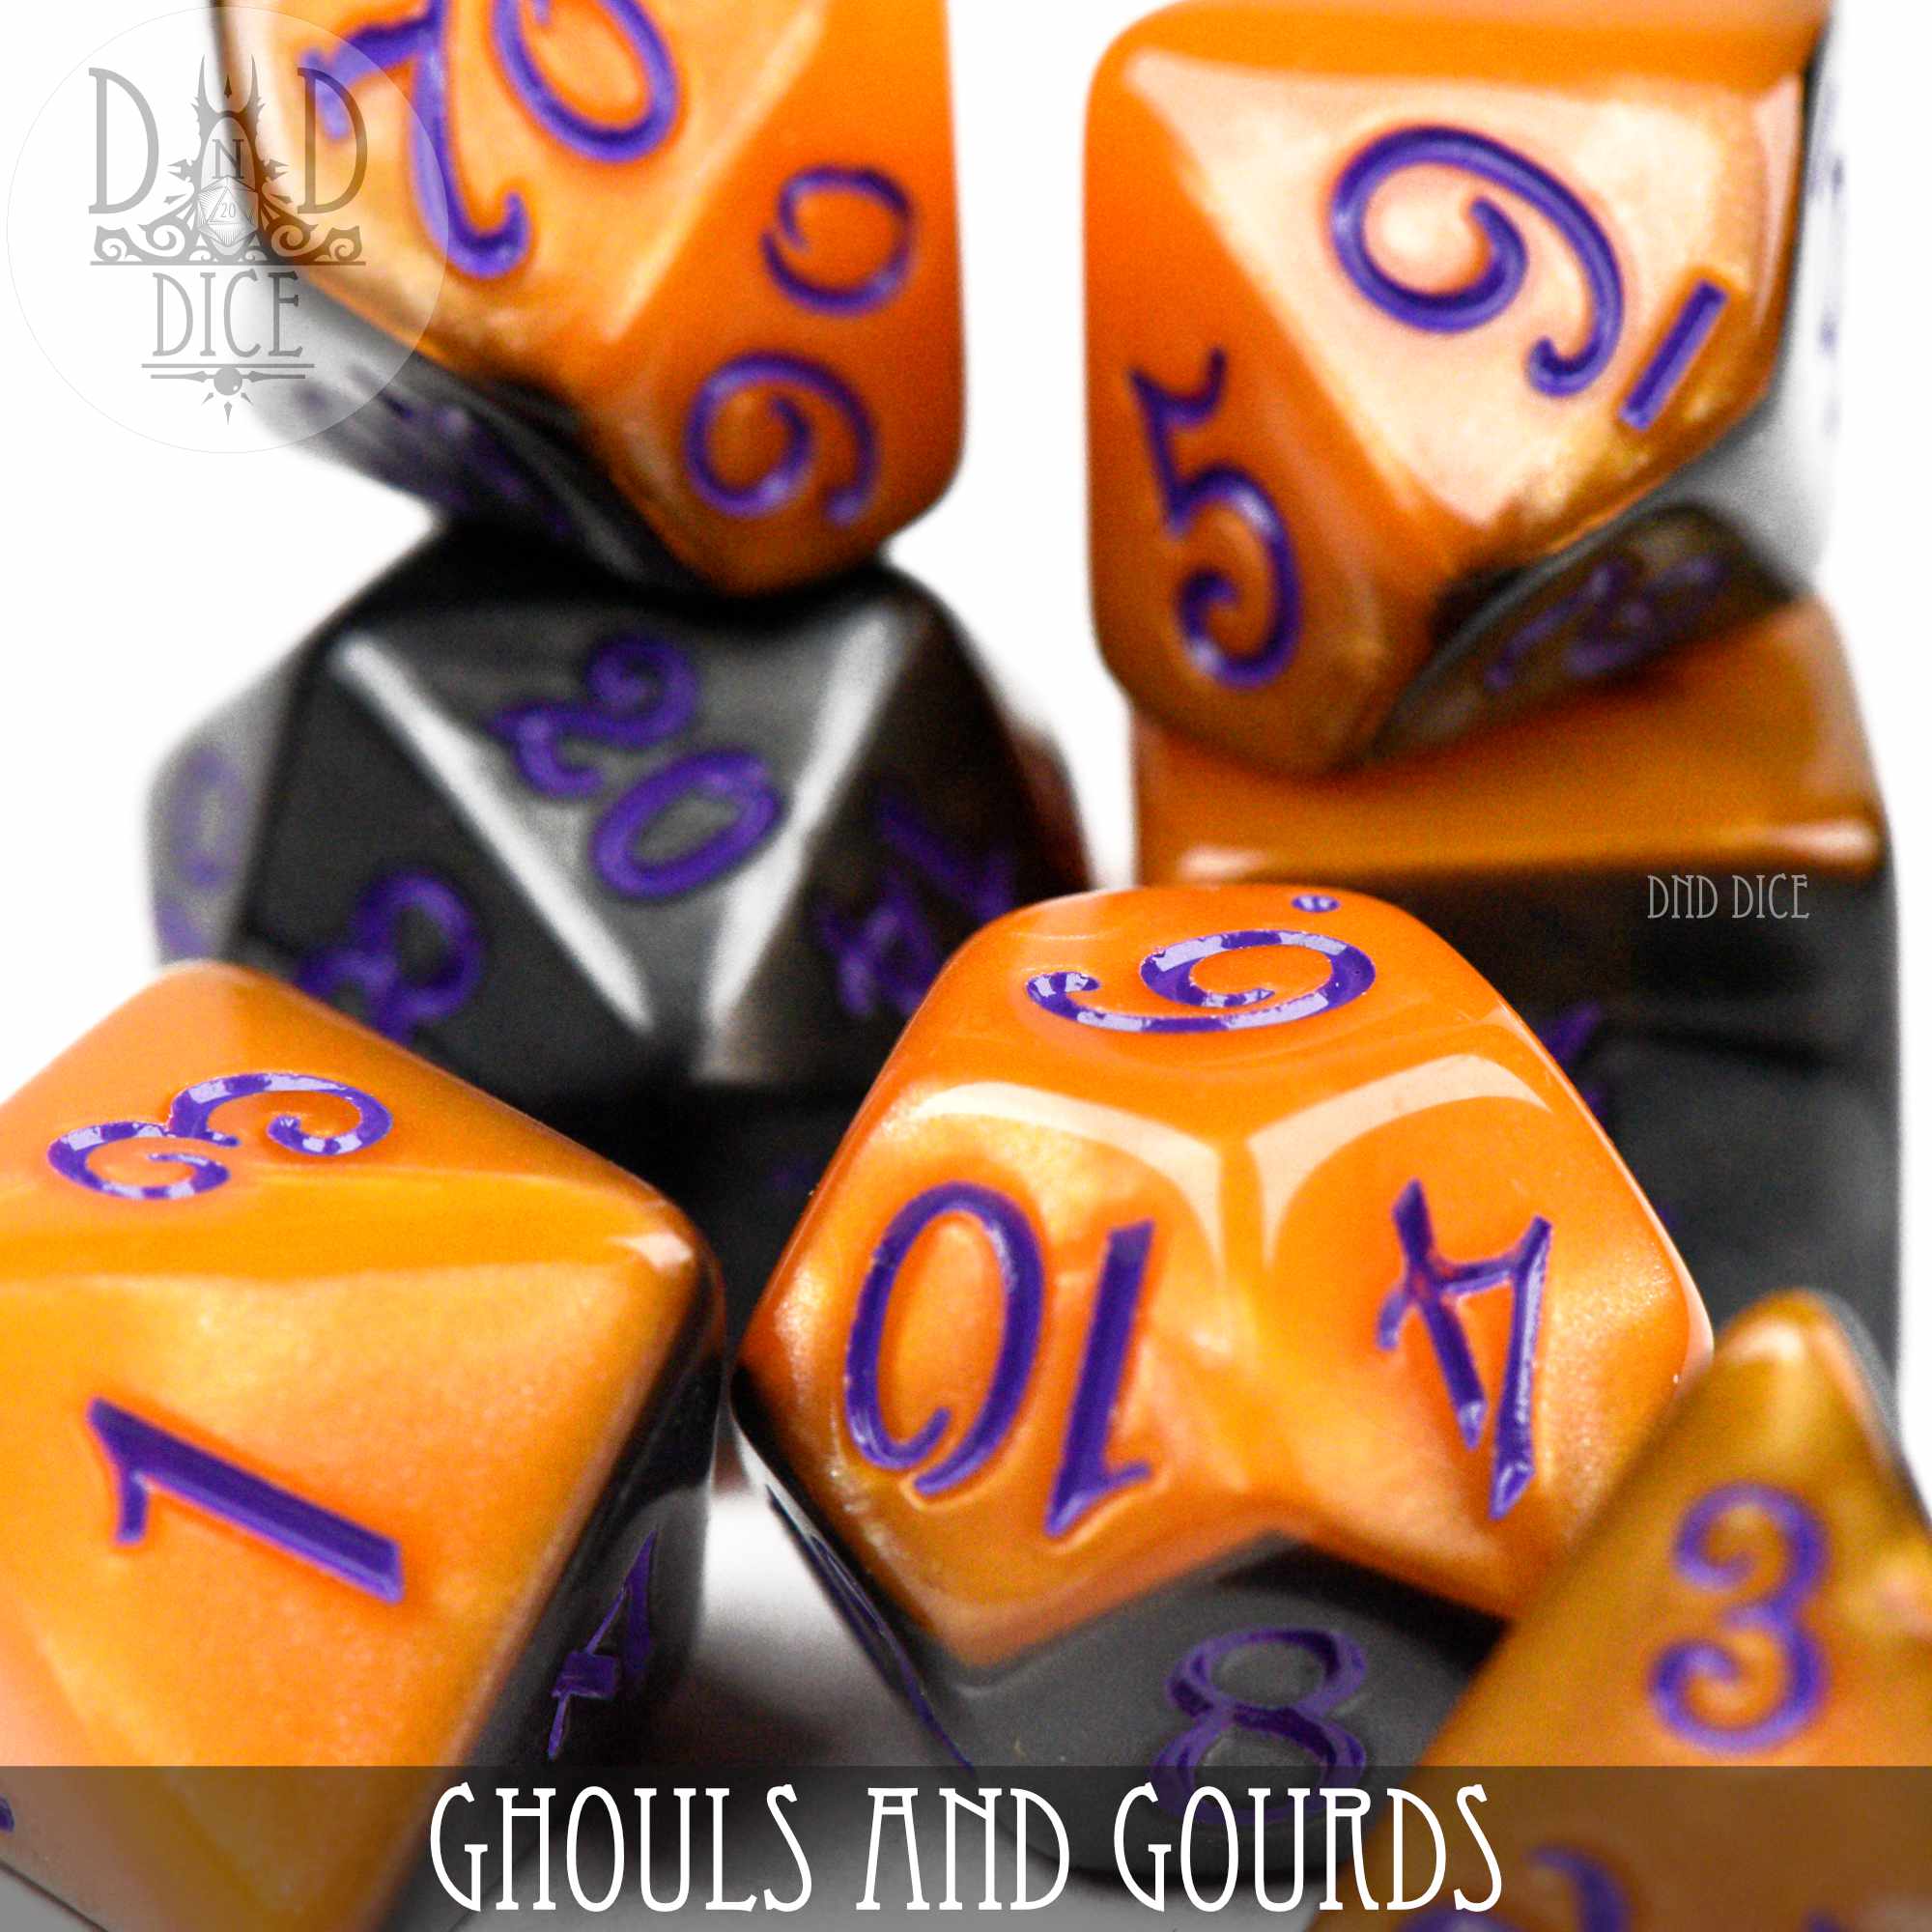 Ghouls and Gourds